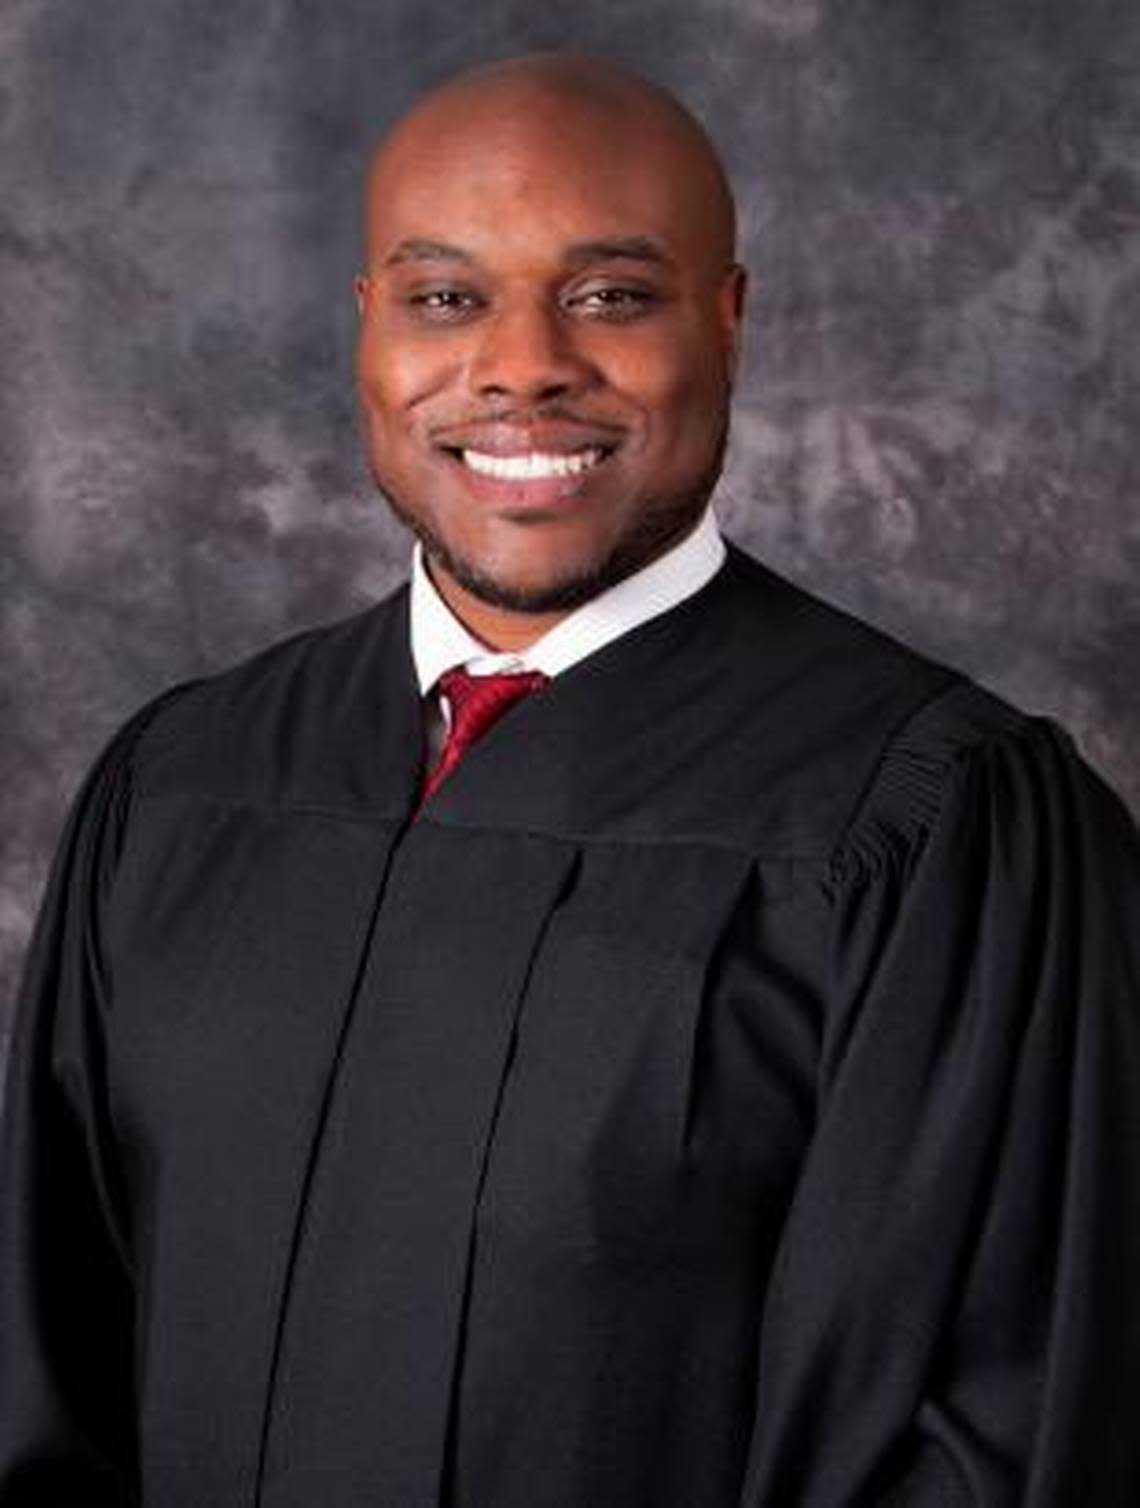 Judge Andrew Bain was appointed to serve as state attorney of Orlando and Osceola counties. He’s a graduate of Blanche Ely High School in Pompano Beach, the University of Miami and Florida A&M College of Law. Ninth Judicial Circuit of Florida